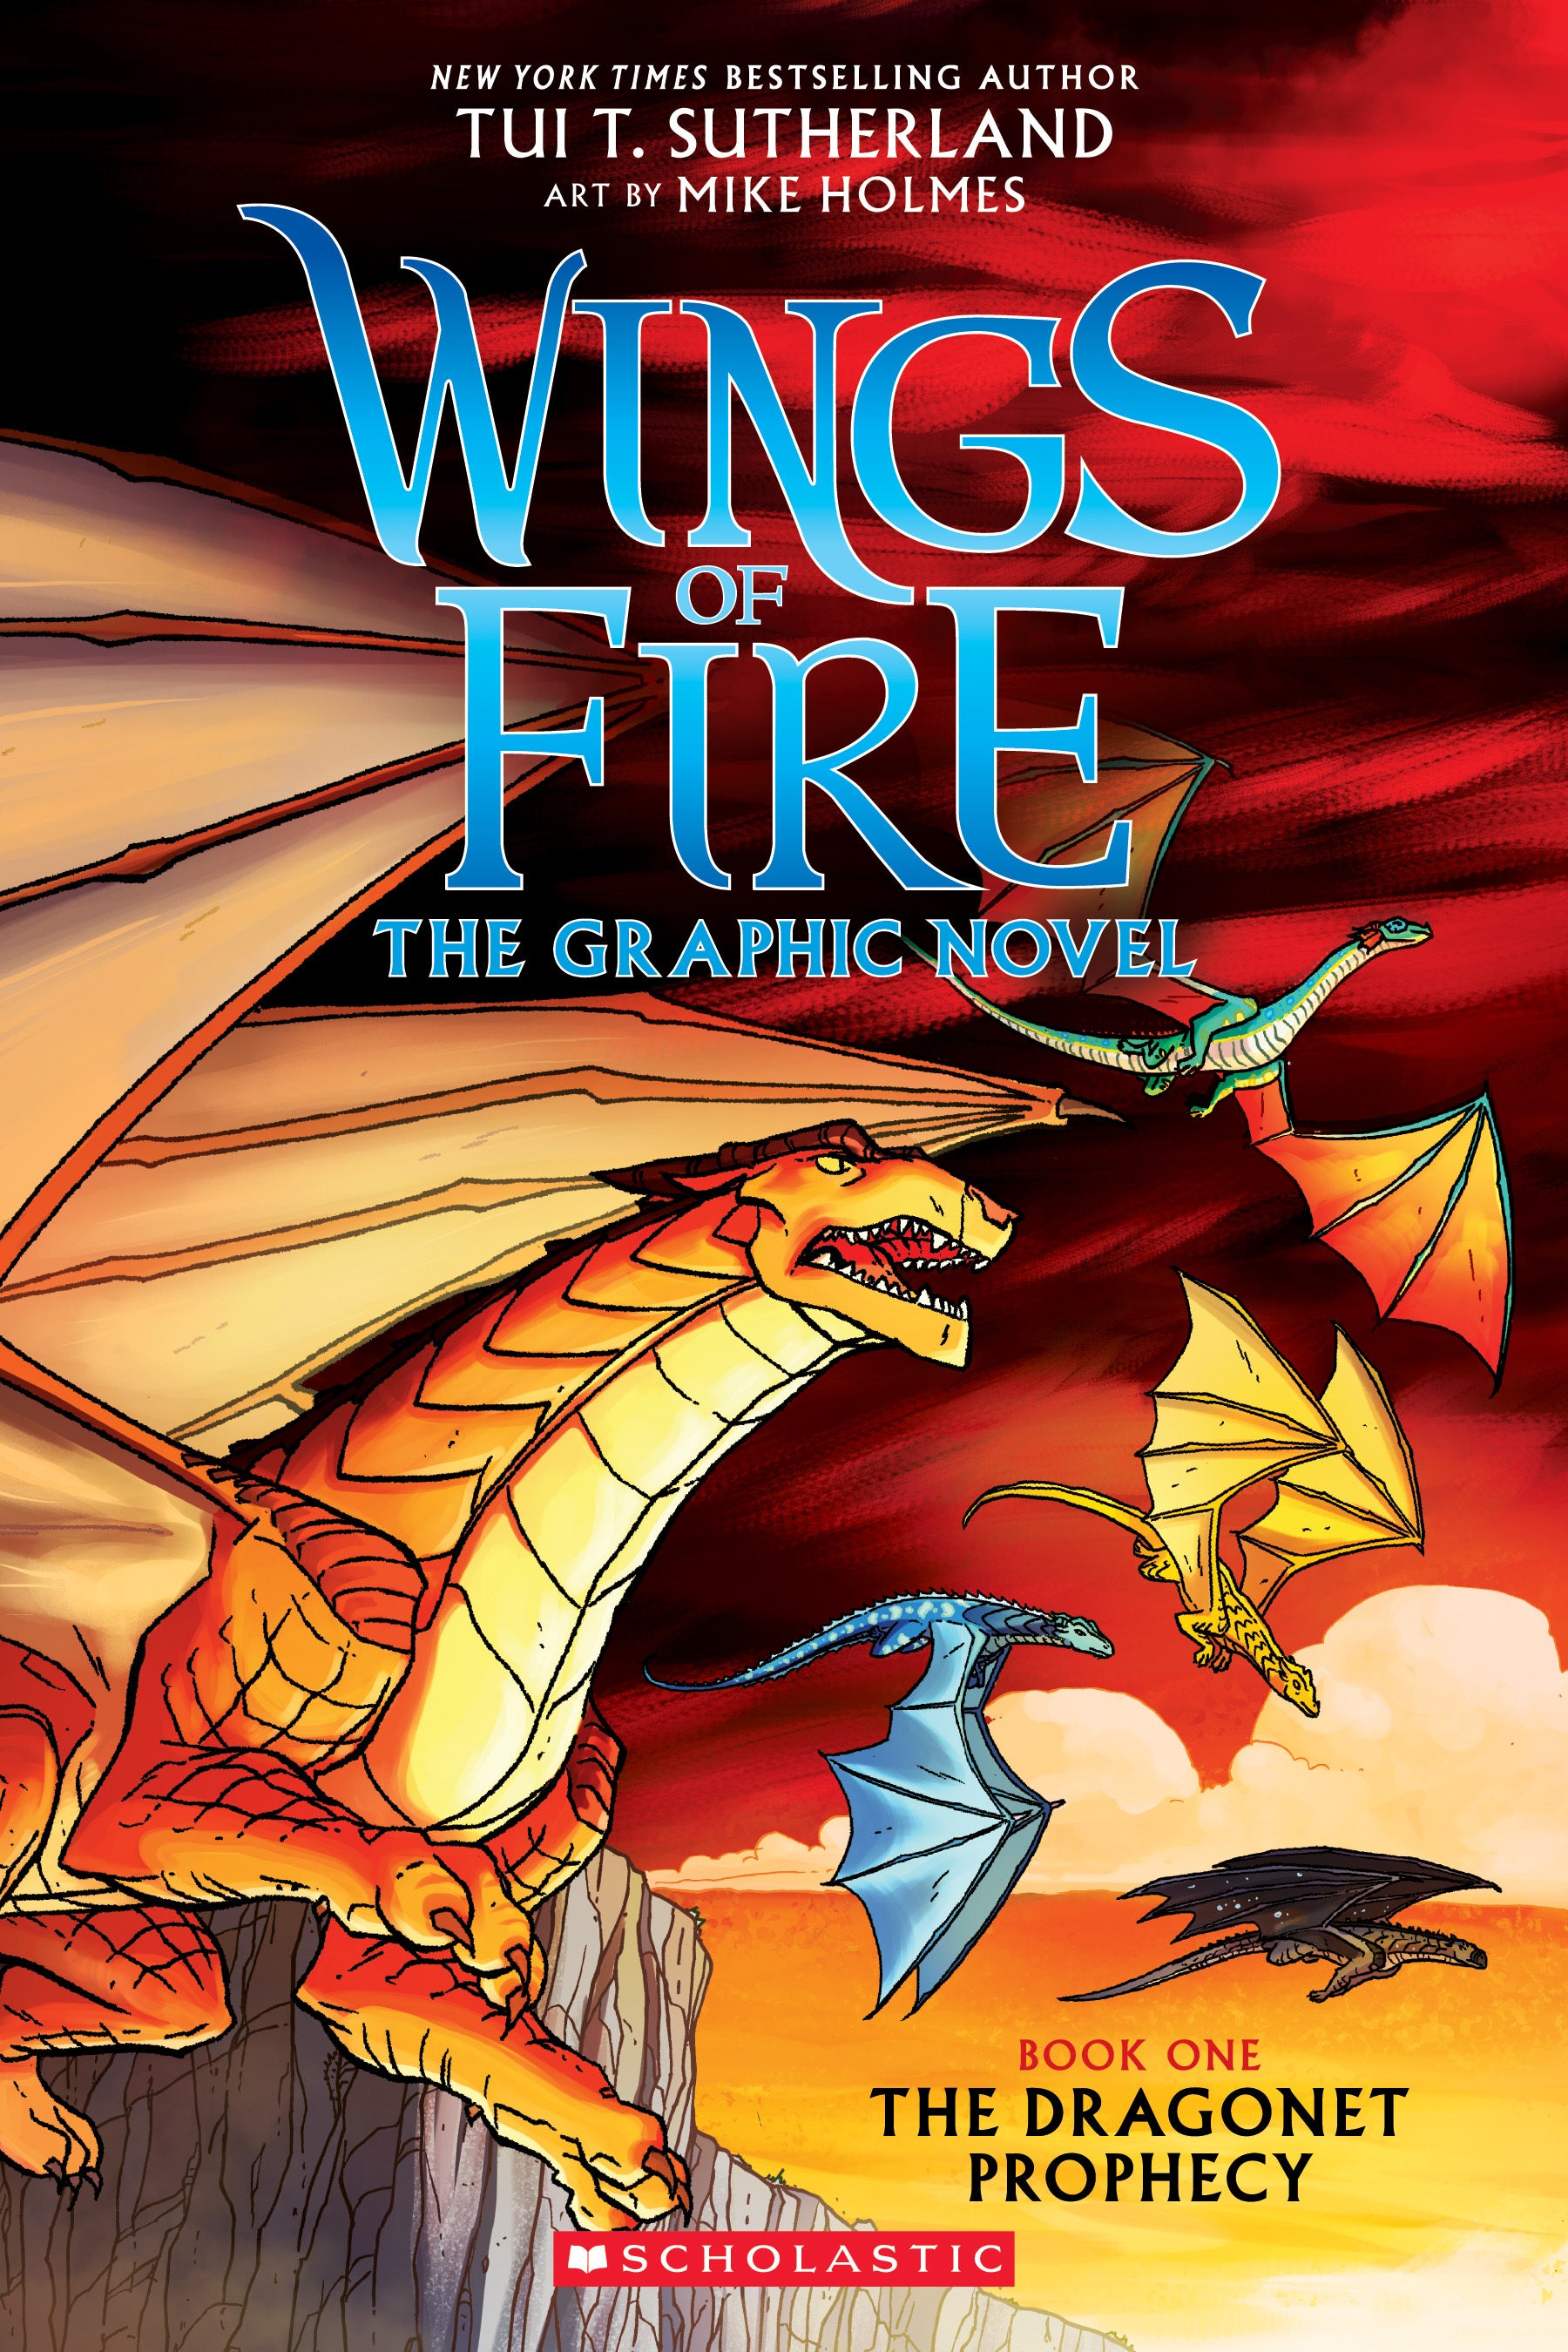 Wings of Fire: The Dragonet Prophecy: A Graphic Novel (Wings of Fire Graphic Novel #1): Volume 1 - by Tui T. Sutherland